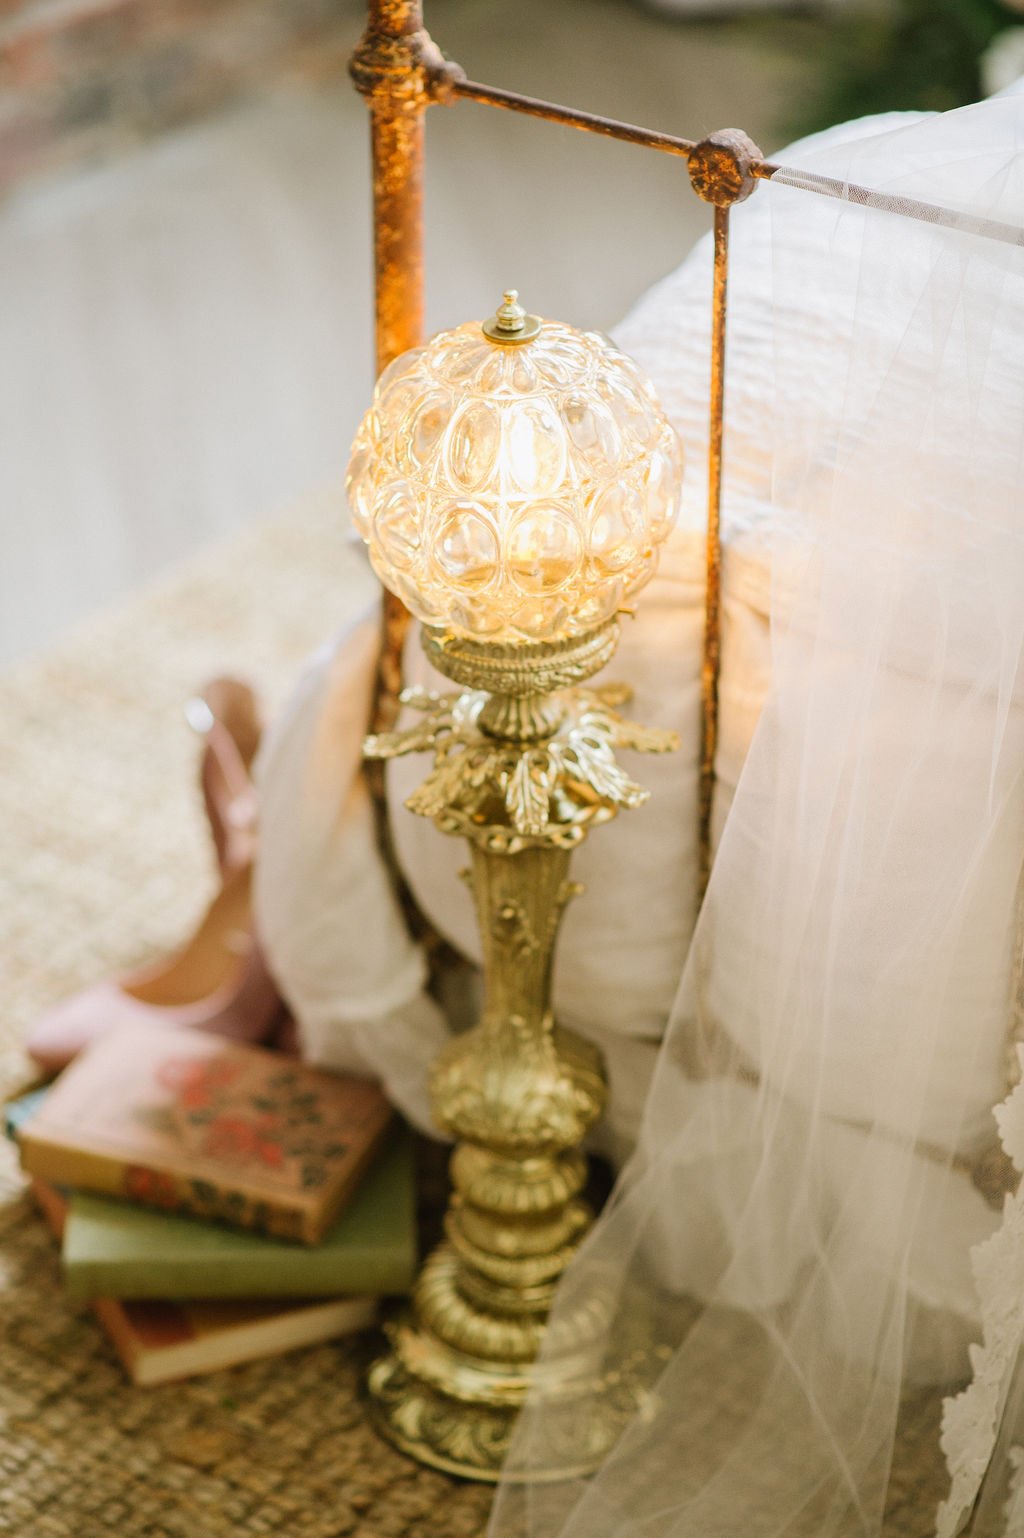 Ambient Lighting Rentals With Our Champagne Glass & Antique Brass Lighting Rentals By Coven Creative.jpg